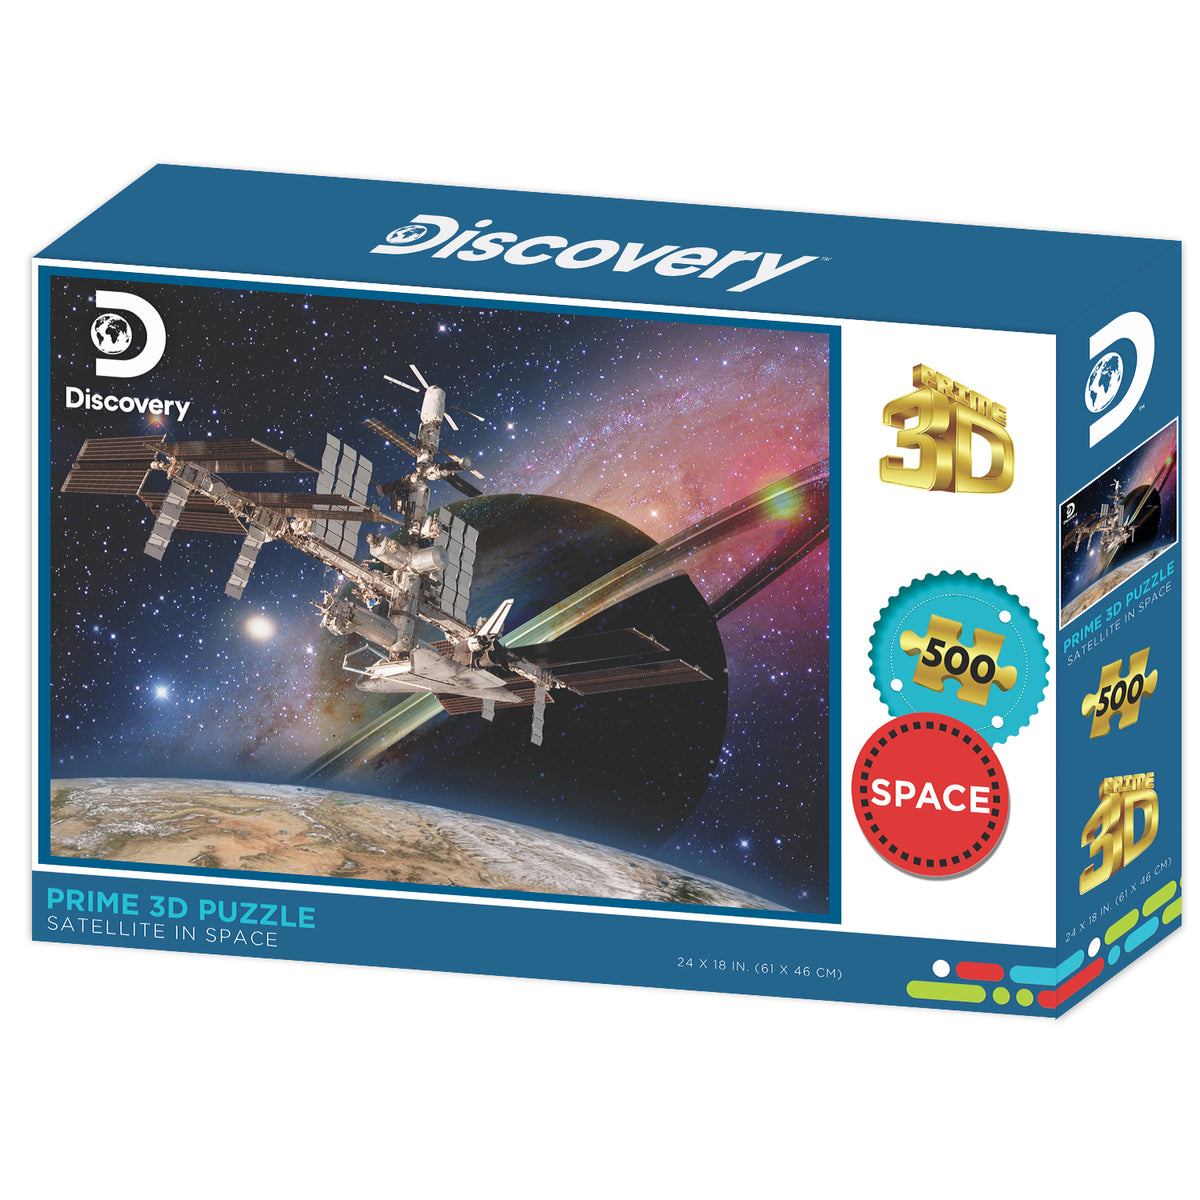 10418 | Satellite in Space Discovery 3D Jigsaw Puzzle 500pc  24x18"